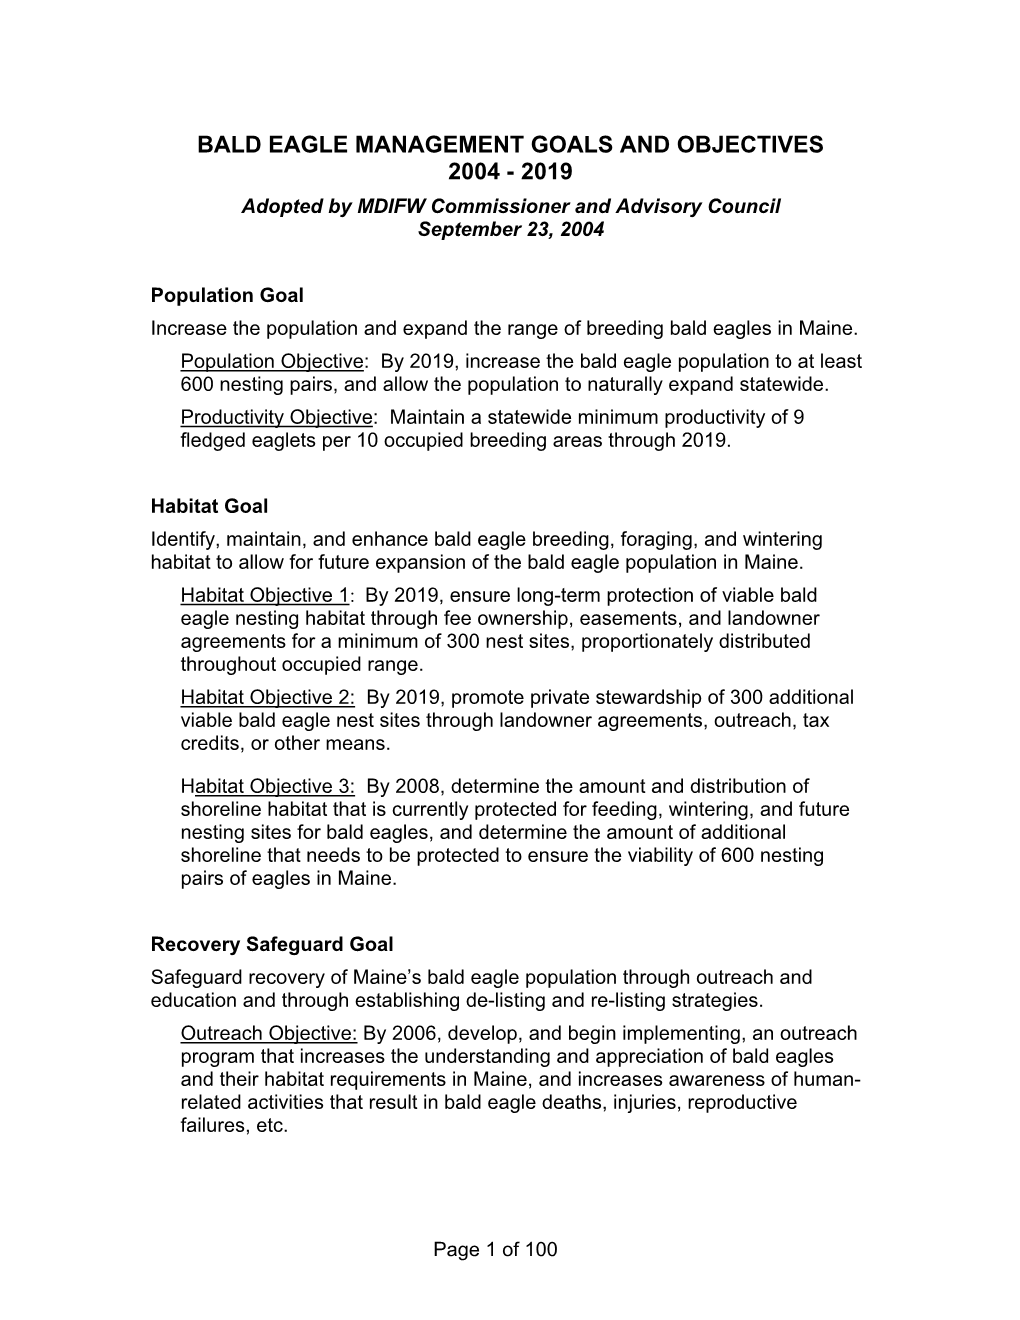 BALD EAGLE MANAGEMENT GOALS and OBJECTIVES 2004 - 2019 Adopted by MDIFW Commissioner and Advisory Council September 23, 2004